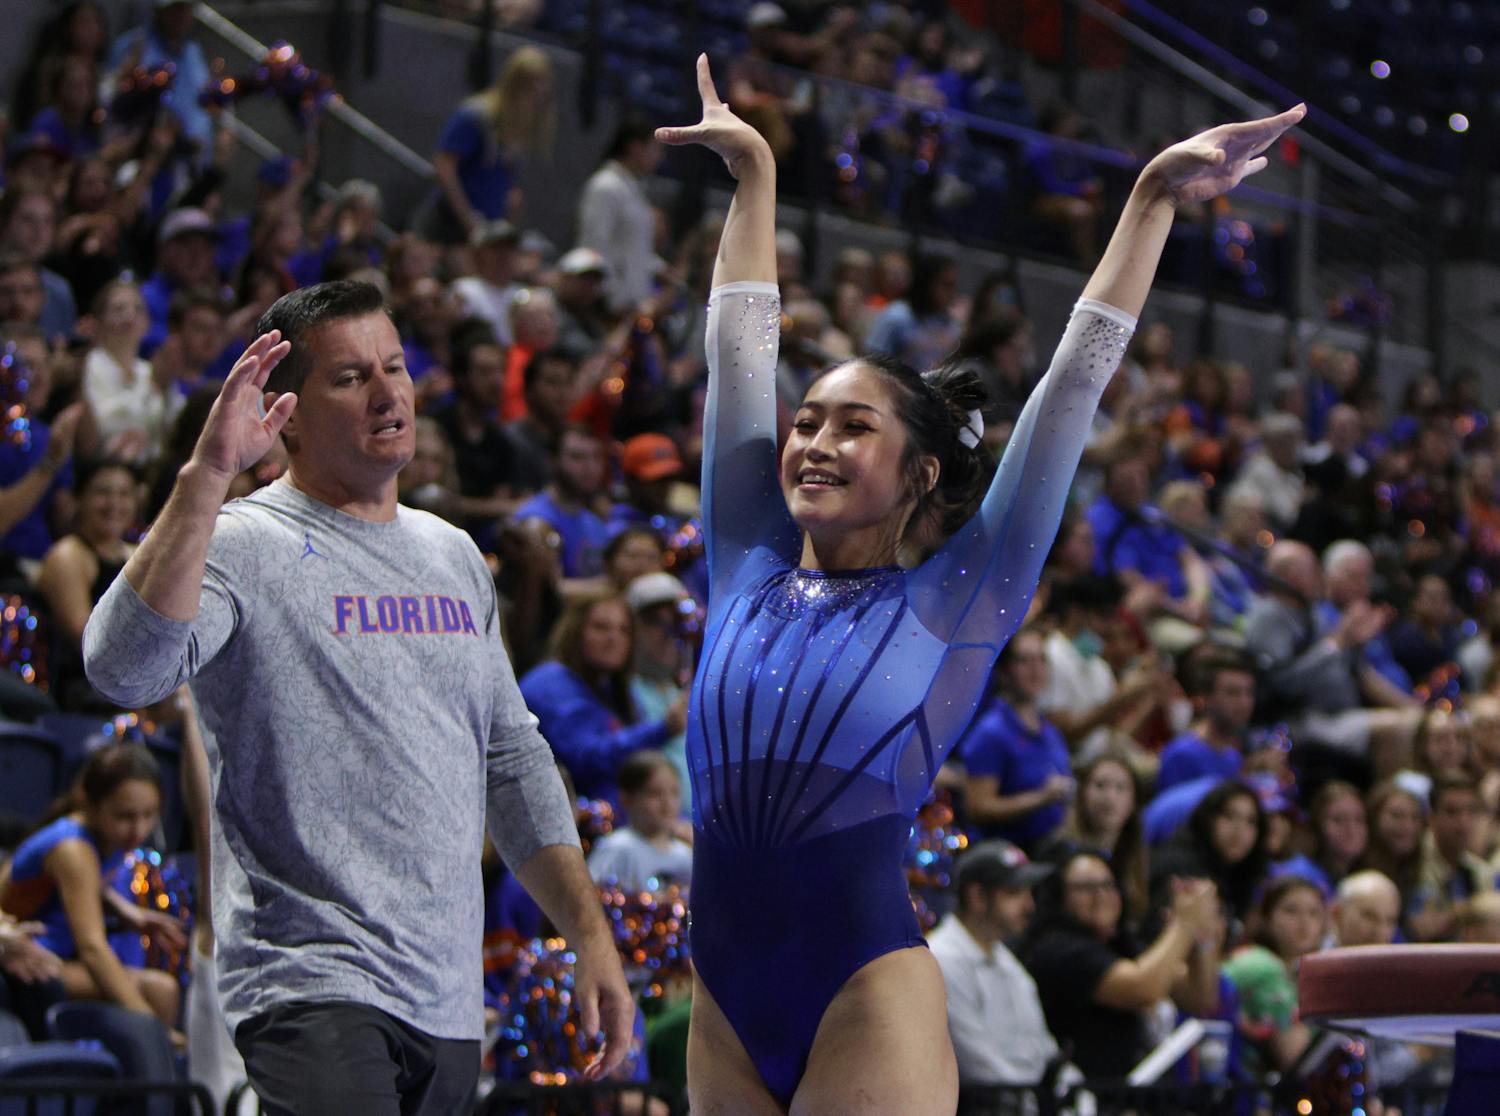 The Florida Gators gymnastics gave fans a preview of their upcoming 2024 season with their Hype Night Monday, Dec. 4. The team competed in all four apparatuses, showing off their routines on the floor, balance beam, uneven bars and vault. Gators seniors Victoria Nguyen and Chloi Clark kicked off their fourth year in college, while new faces like freshman Kaylee Bluffstone donned the orange and blue for the first time.&nbsp;